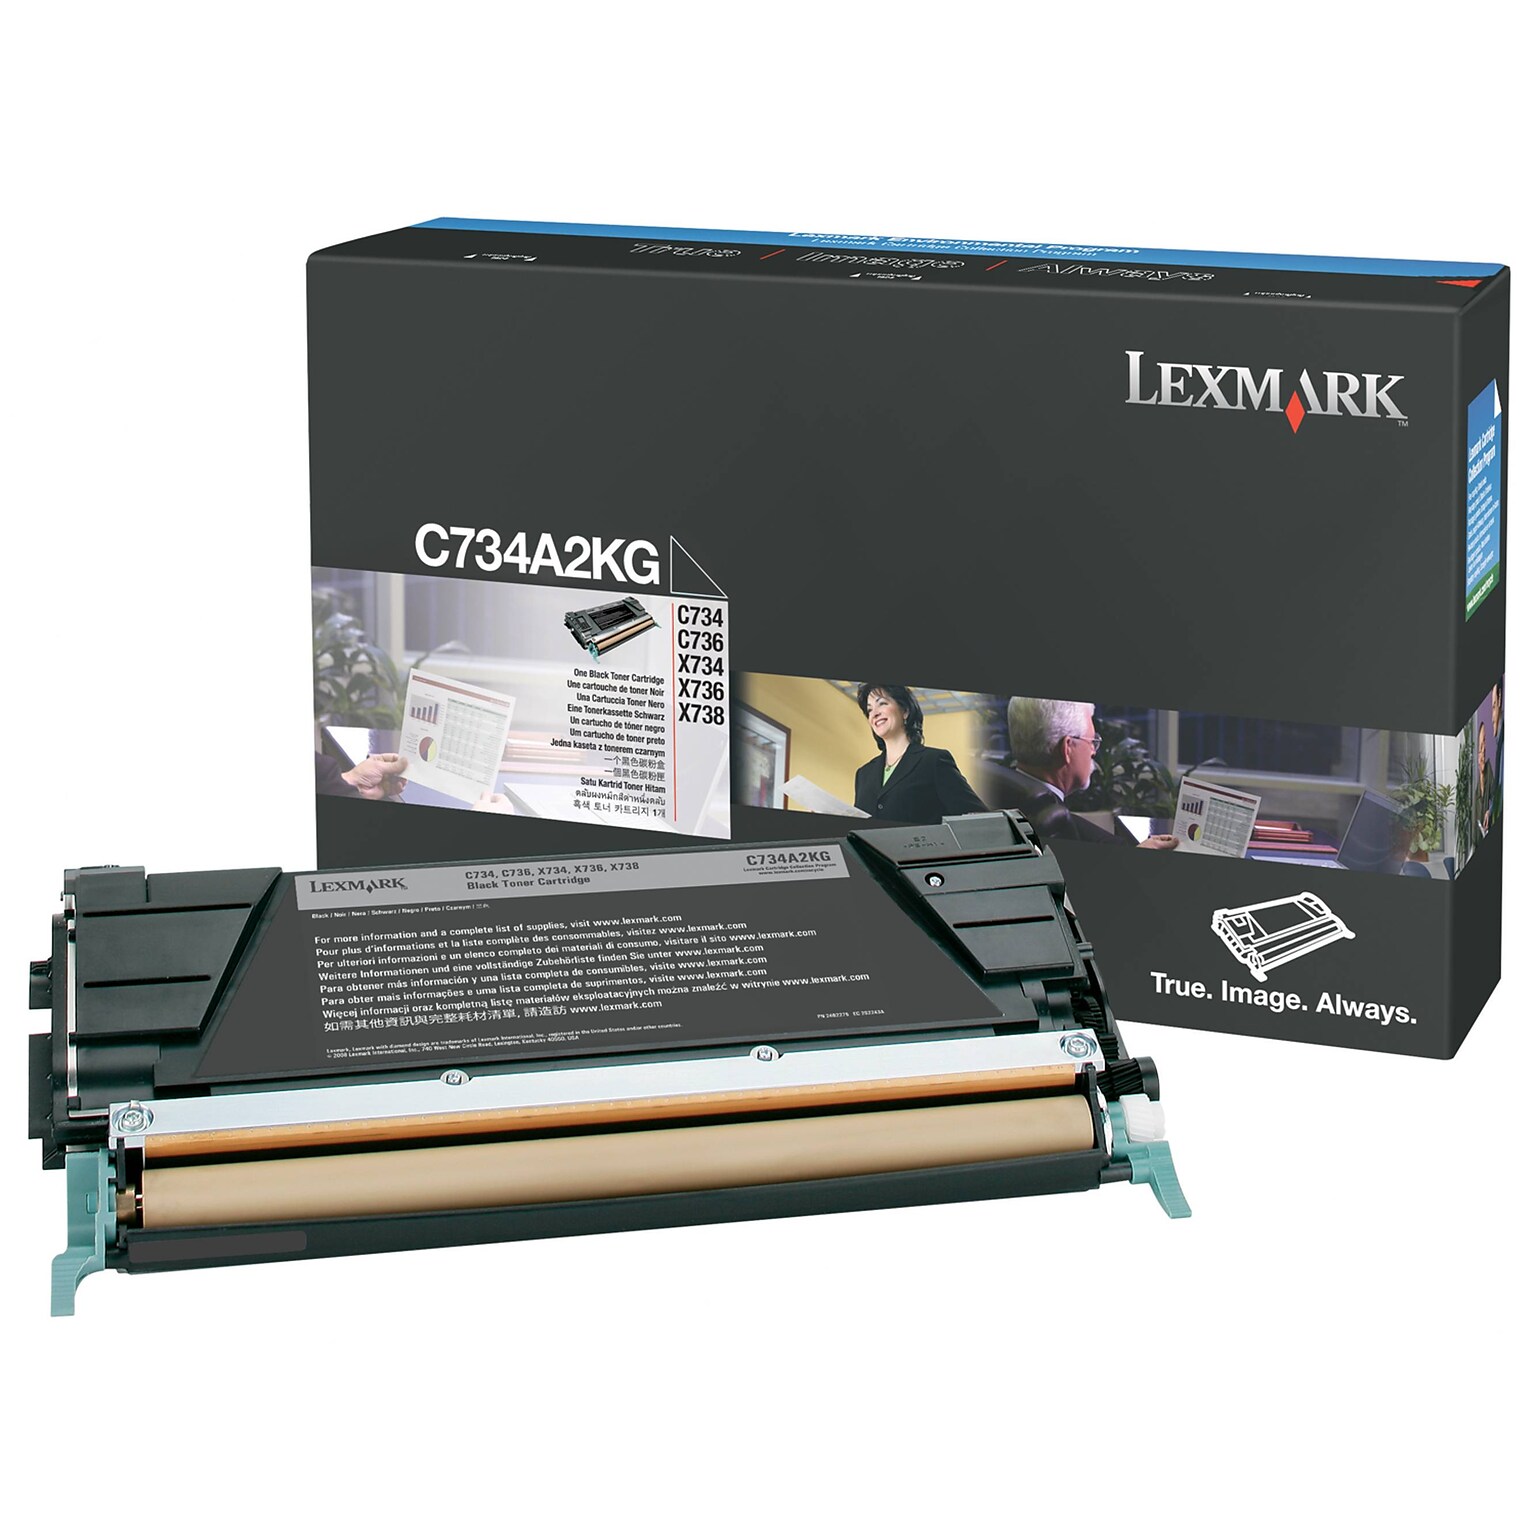 Lexmark C734A2KG Black Standard Yield Toner Cartridge, Prints Up to 8,000 Pages